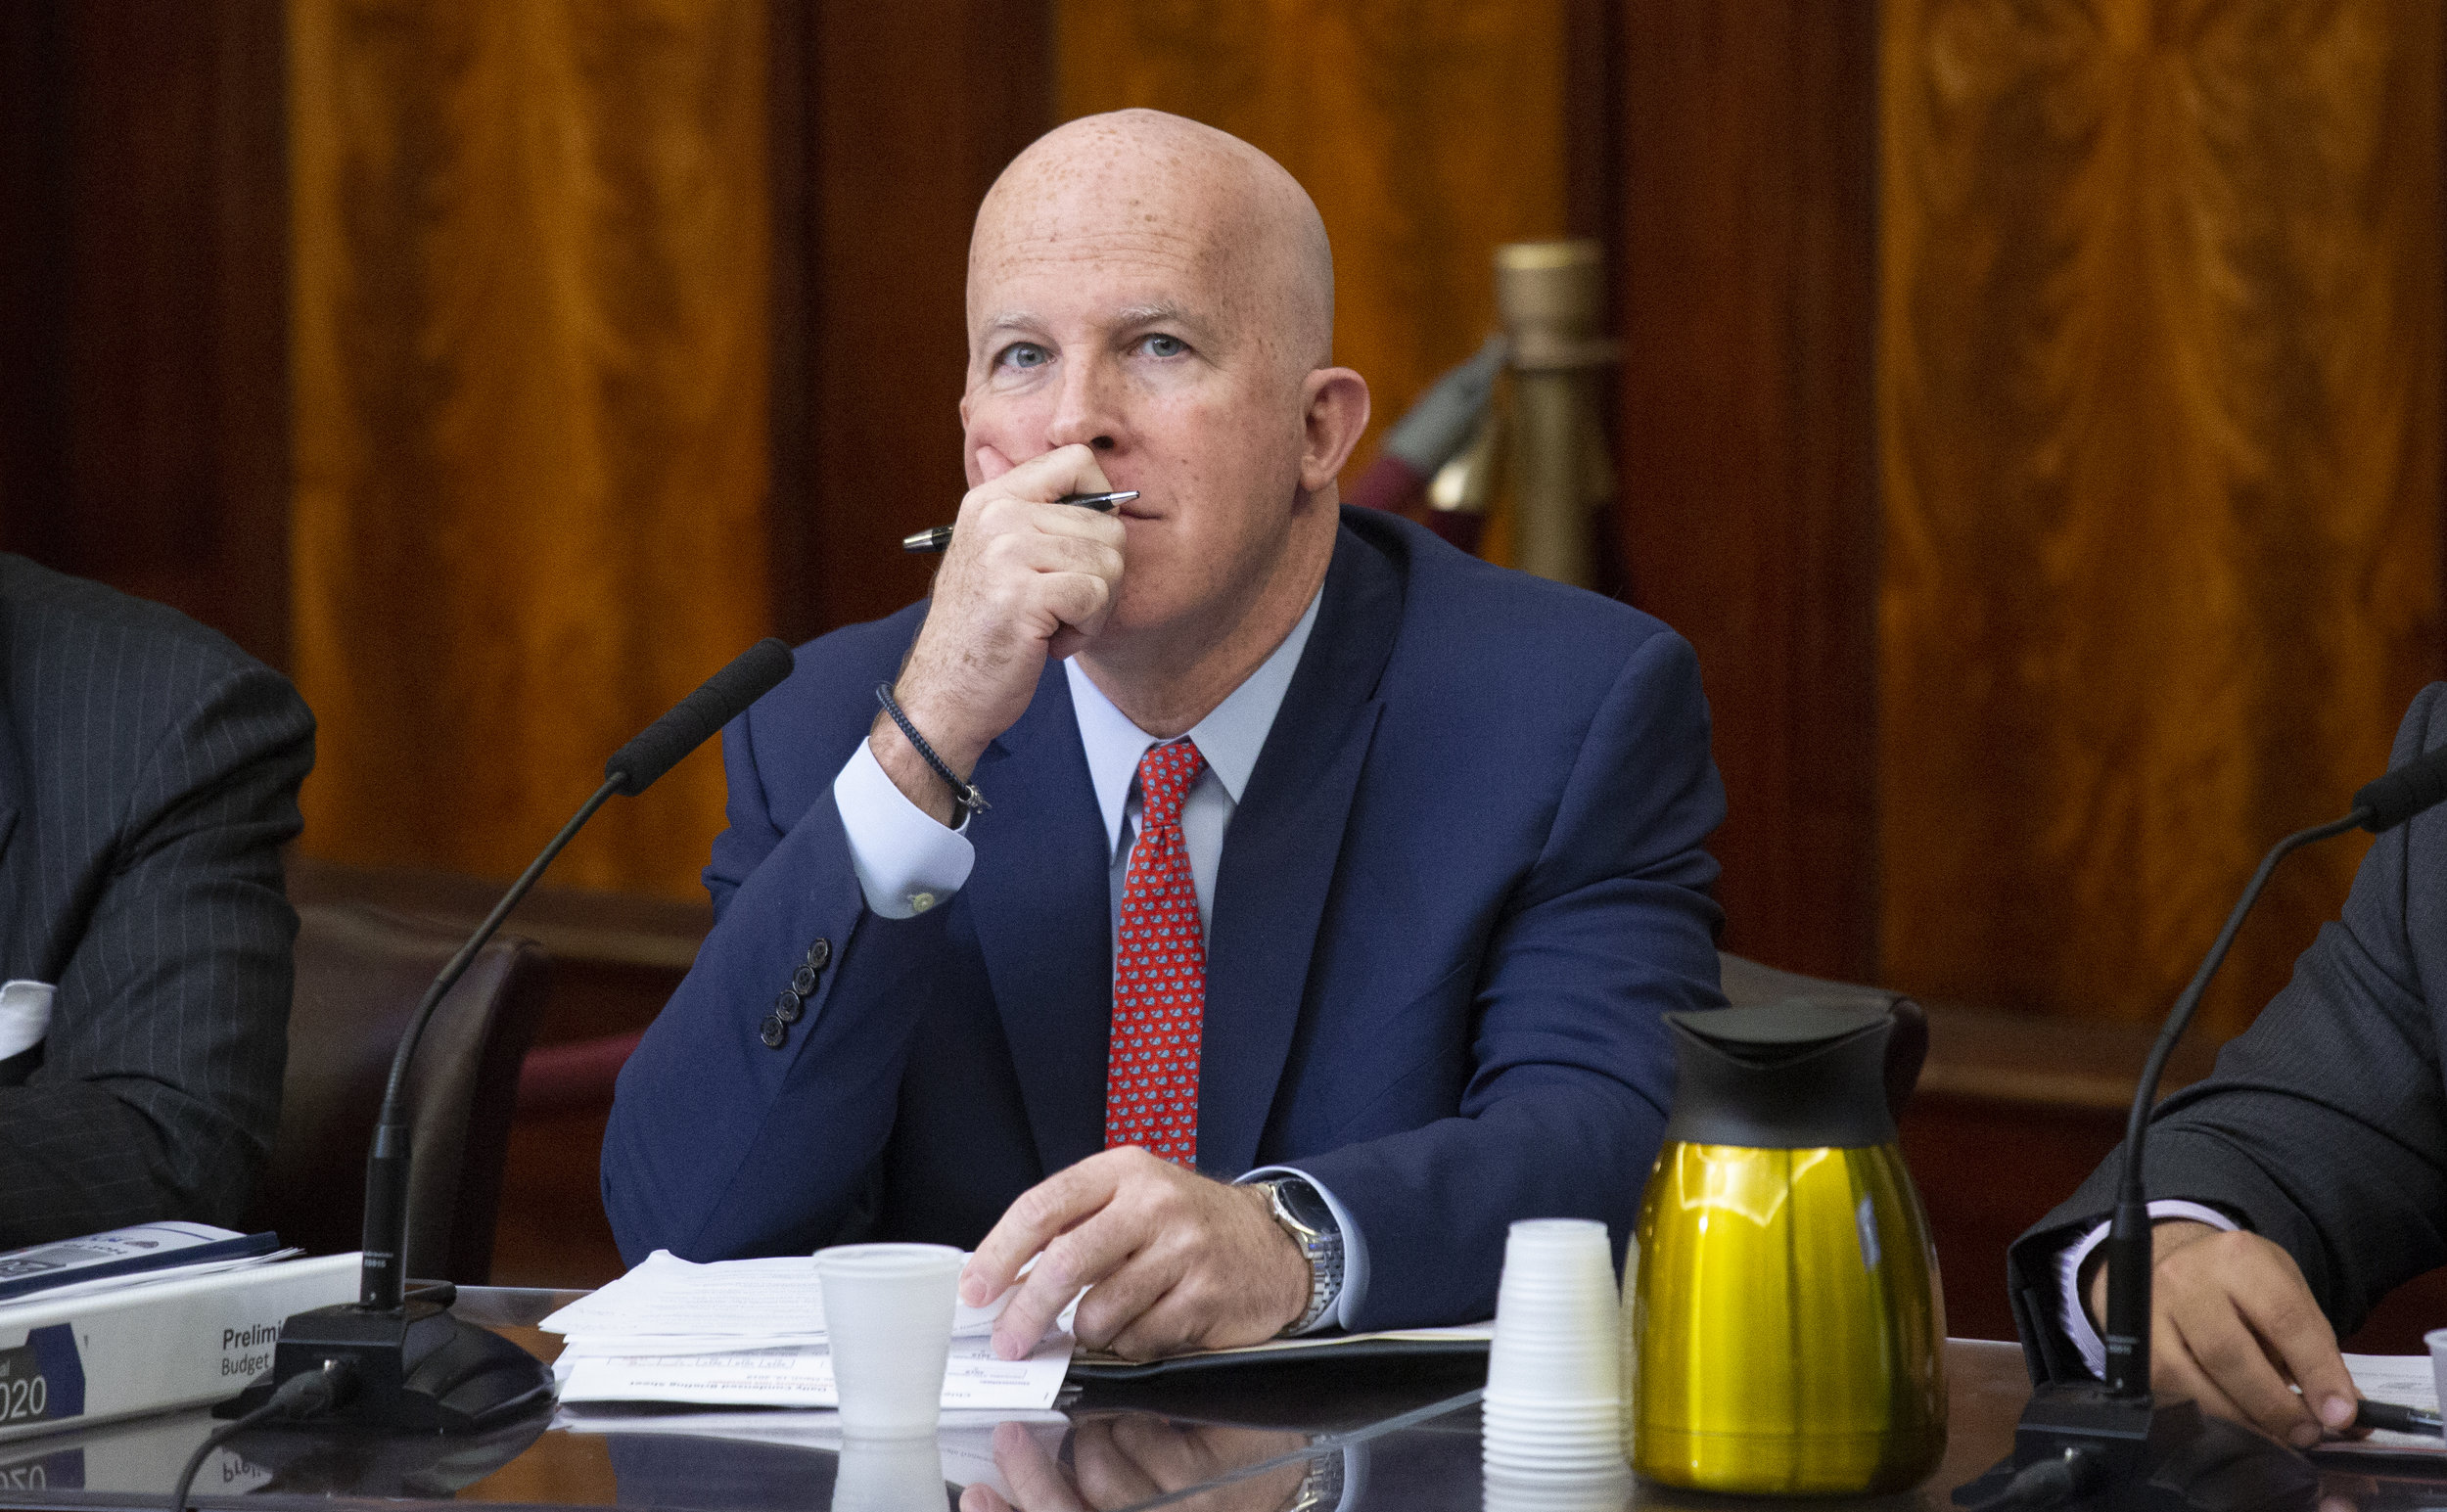 Police Commissioner James O'Neill Testifies Before The New York City Council